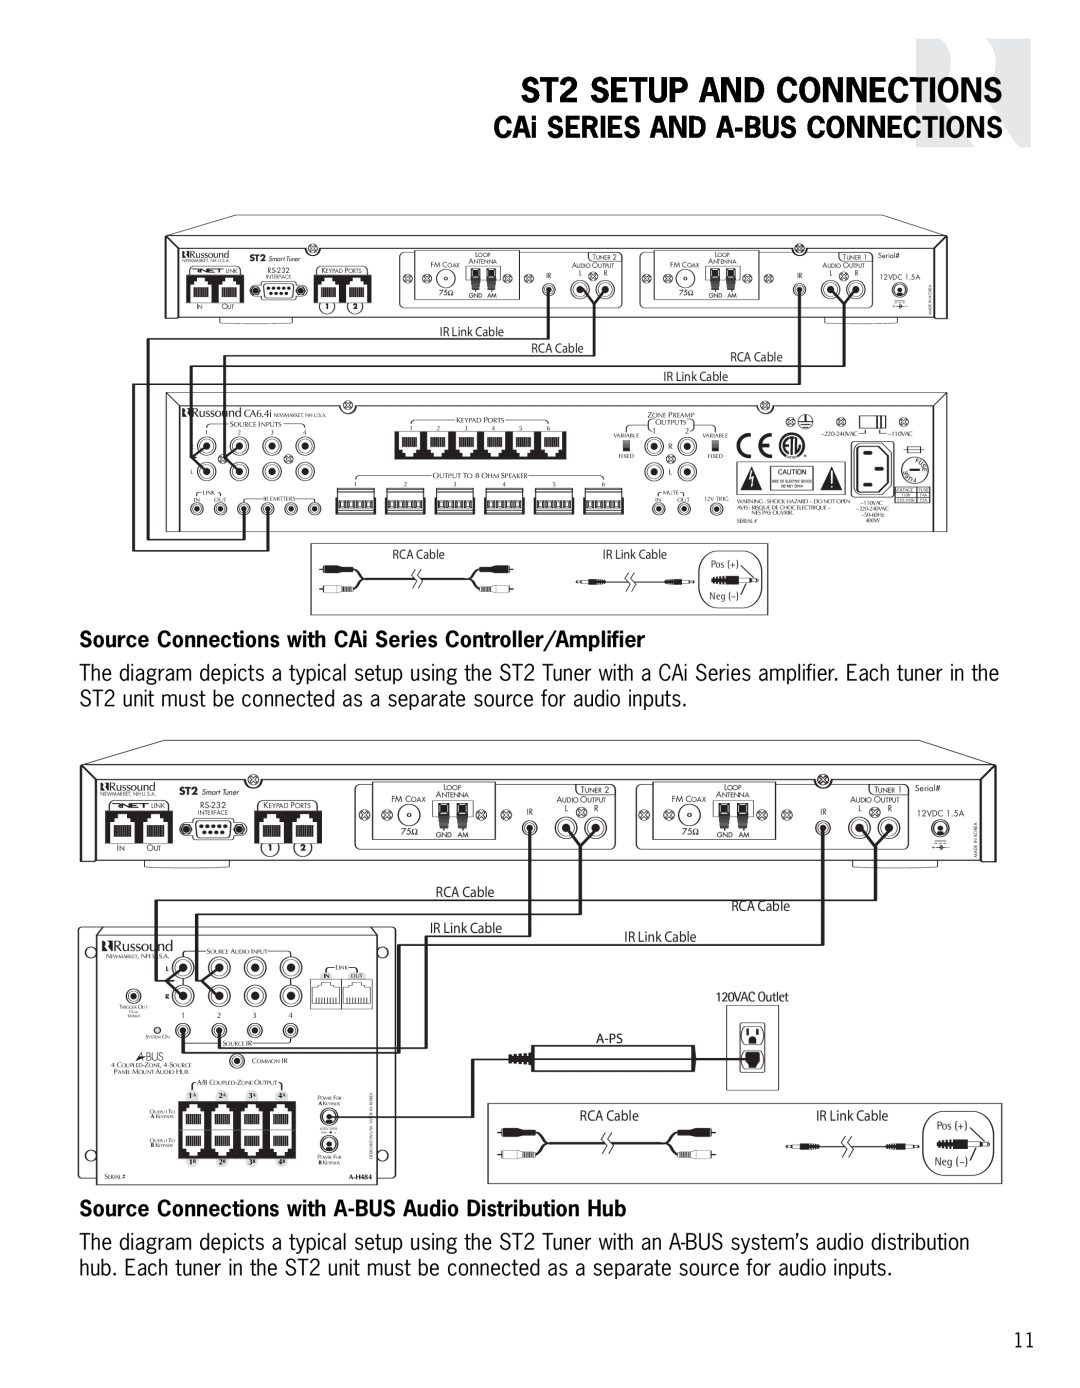 Integra instruction manual CAi SERIES AND A-BUSCONNECTIONS, ST2 SETUP AND CONNECTIONS 